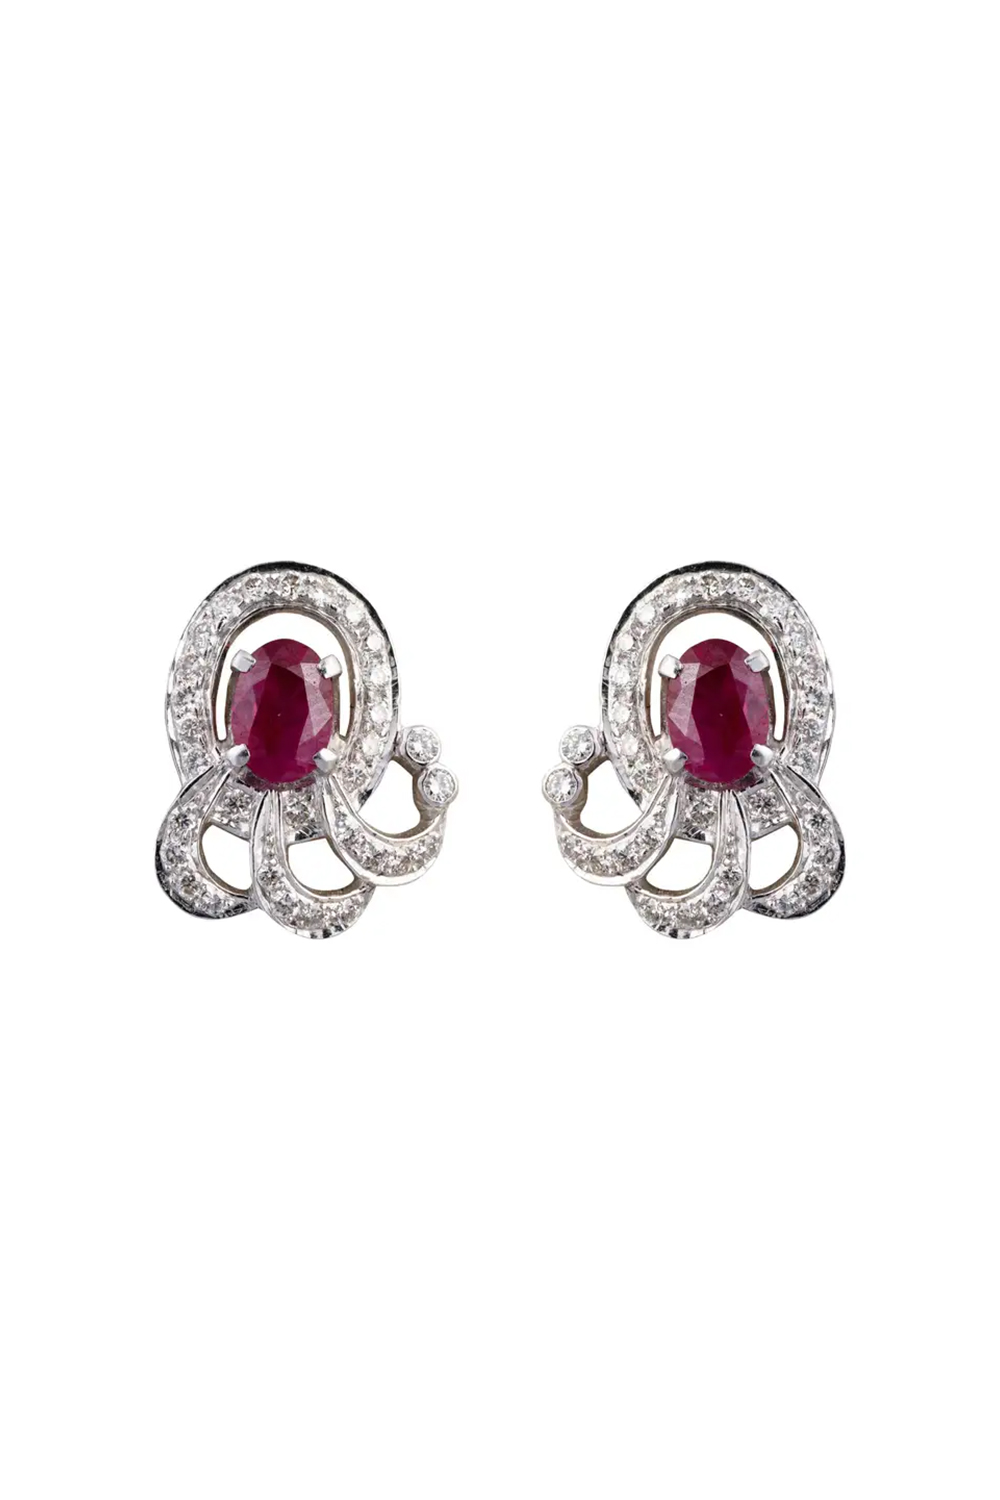 18k gold Diamond and Ruby Earring with 0.50 carats diamond and 1.35 carats ruby